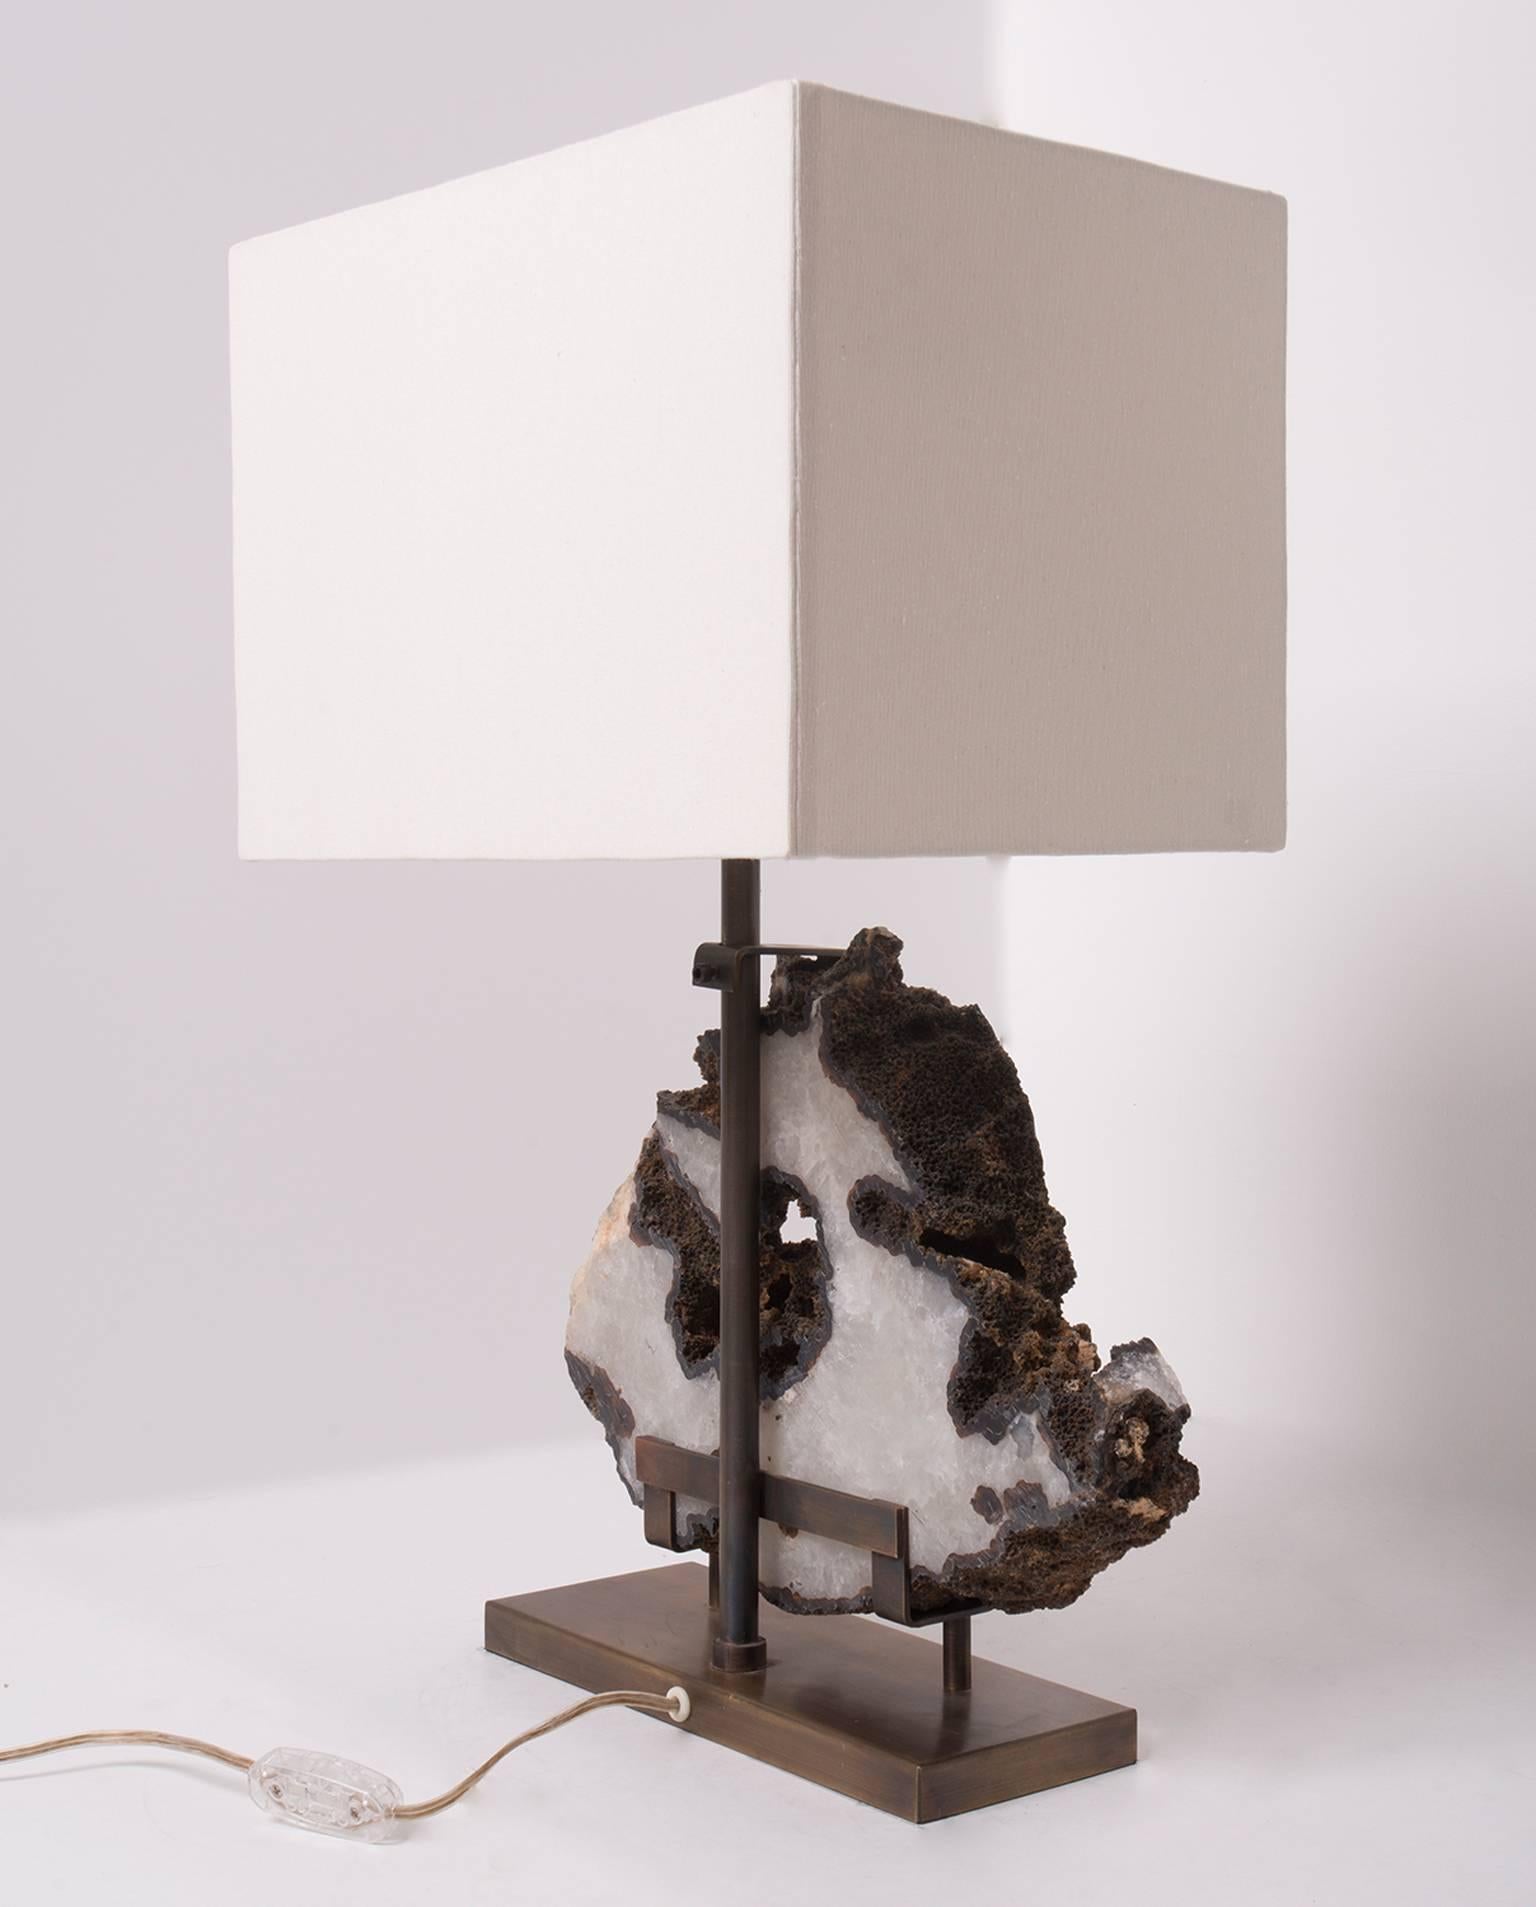 Organic Modern Table Lamp in Brazilian White Agate, Brass Brushed Base with White Linen Shade